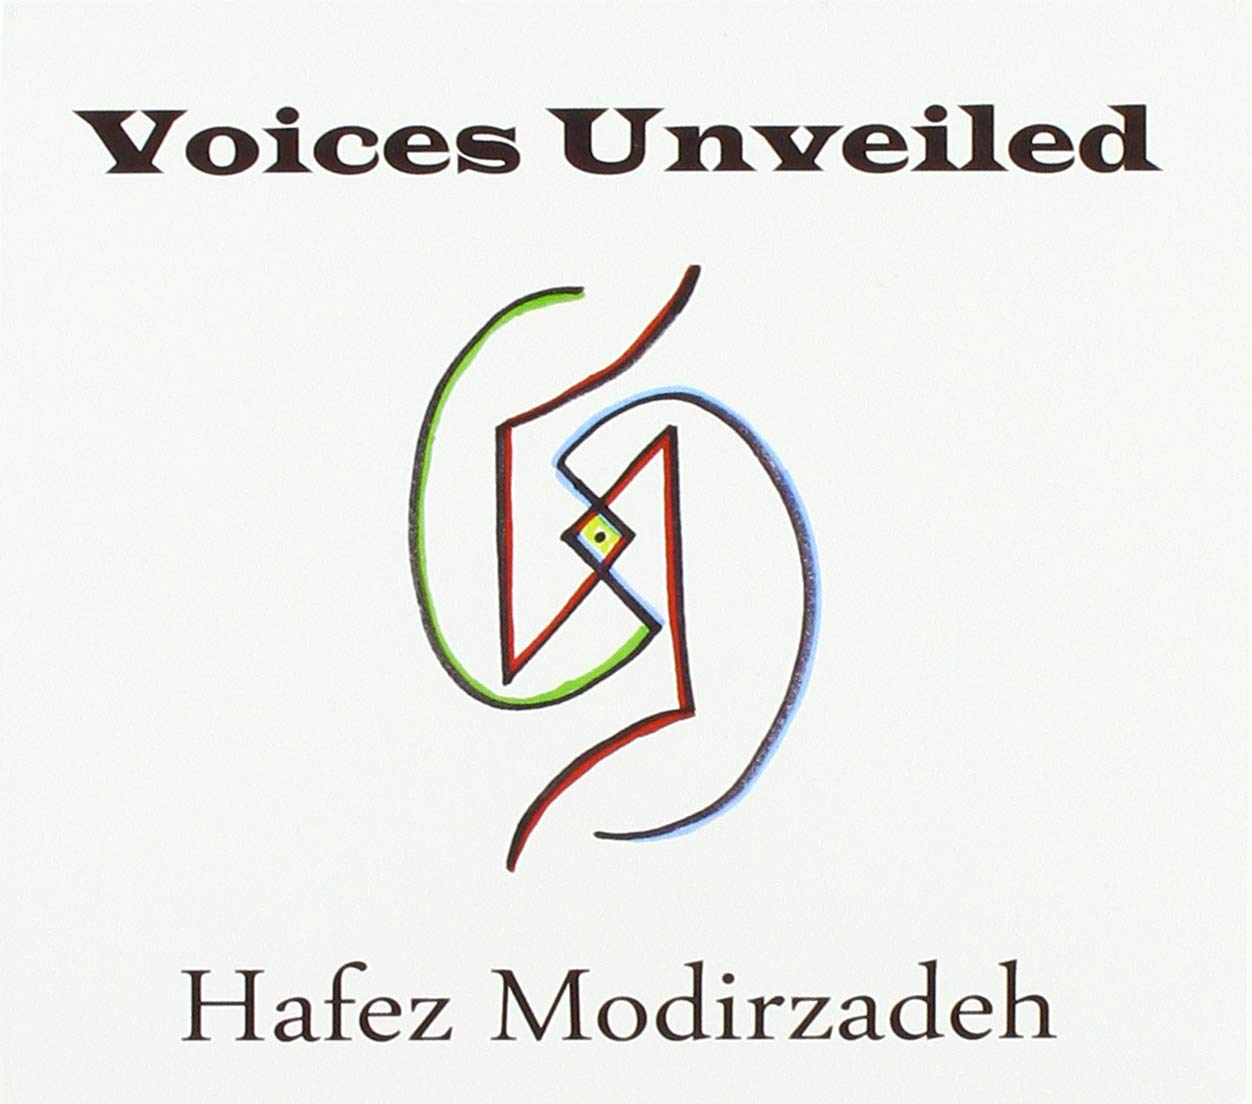 HAFEZ MODIRZADEH - Voices Unveiled cover 